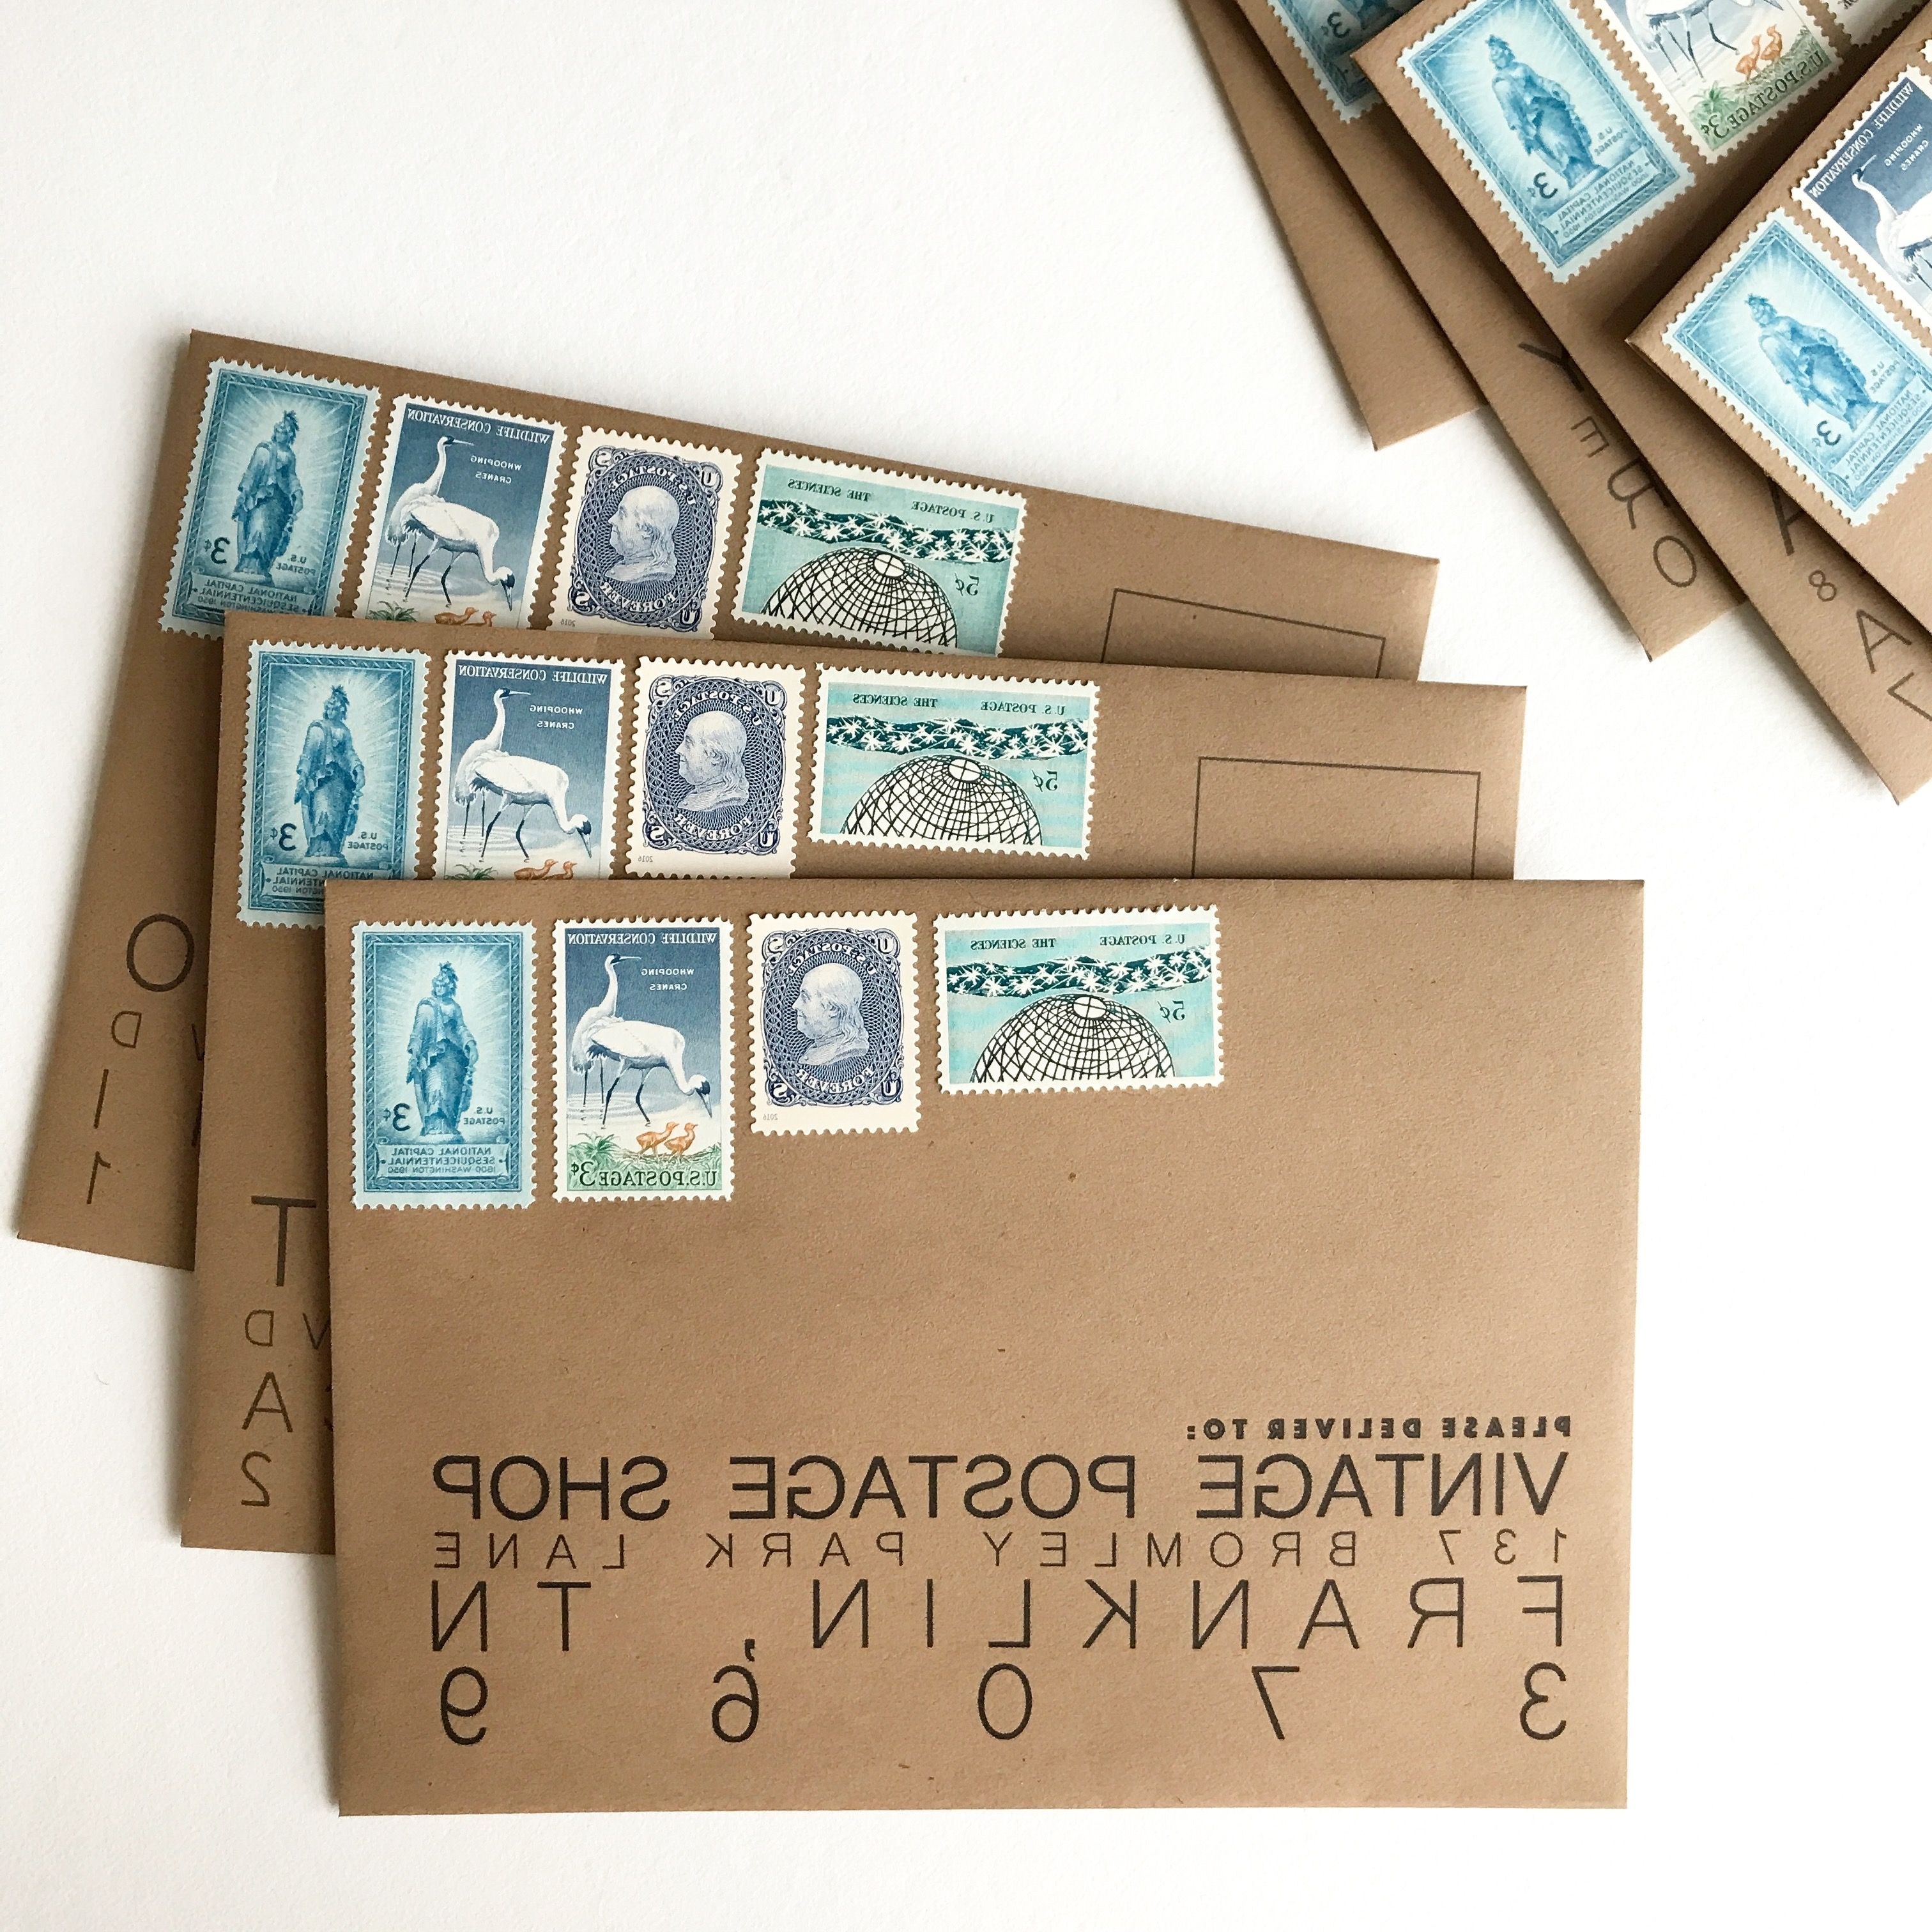 Bentuk Gamis Pernikahan 9fdy Curated Postage Stamps for Wedding Invites Save the